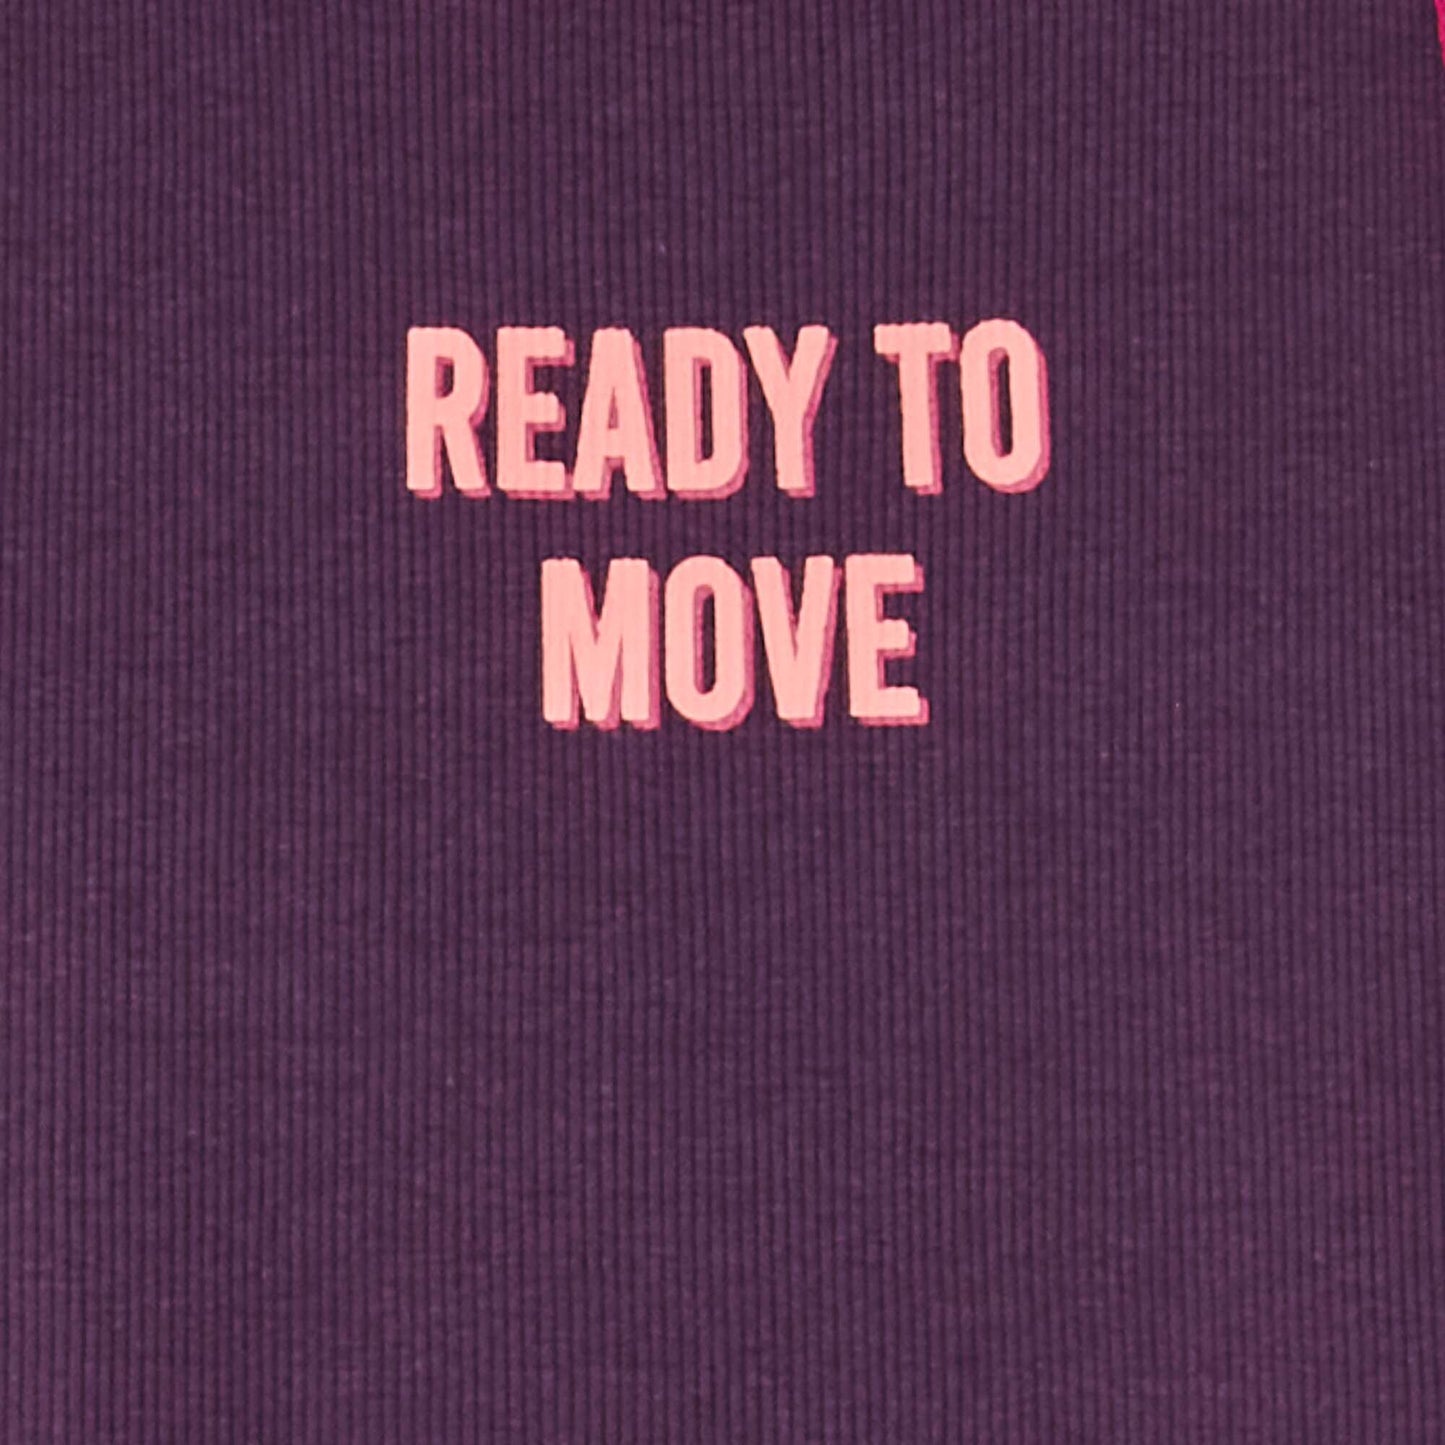 'Ready to move' vest top PINK